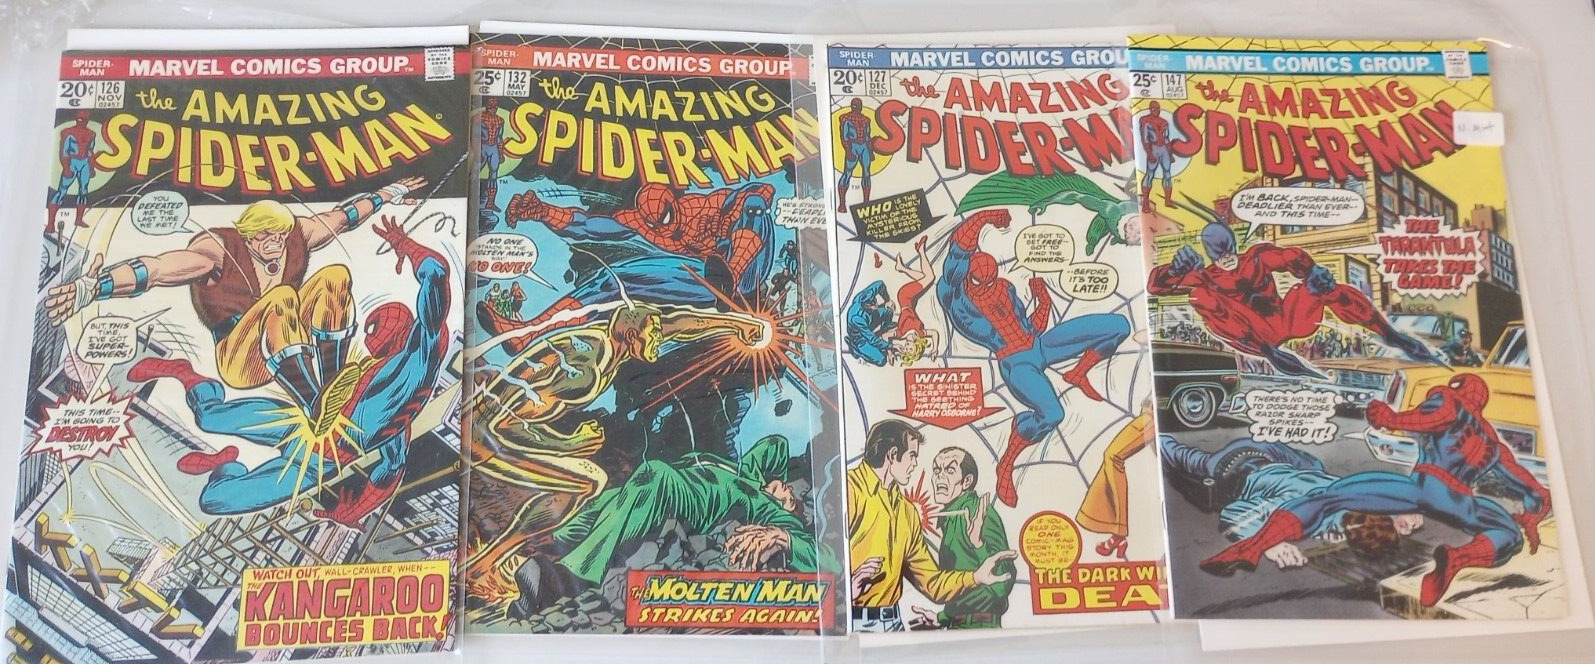 The Amazing Spiderman Comic Book Collection